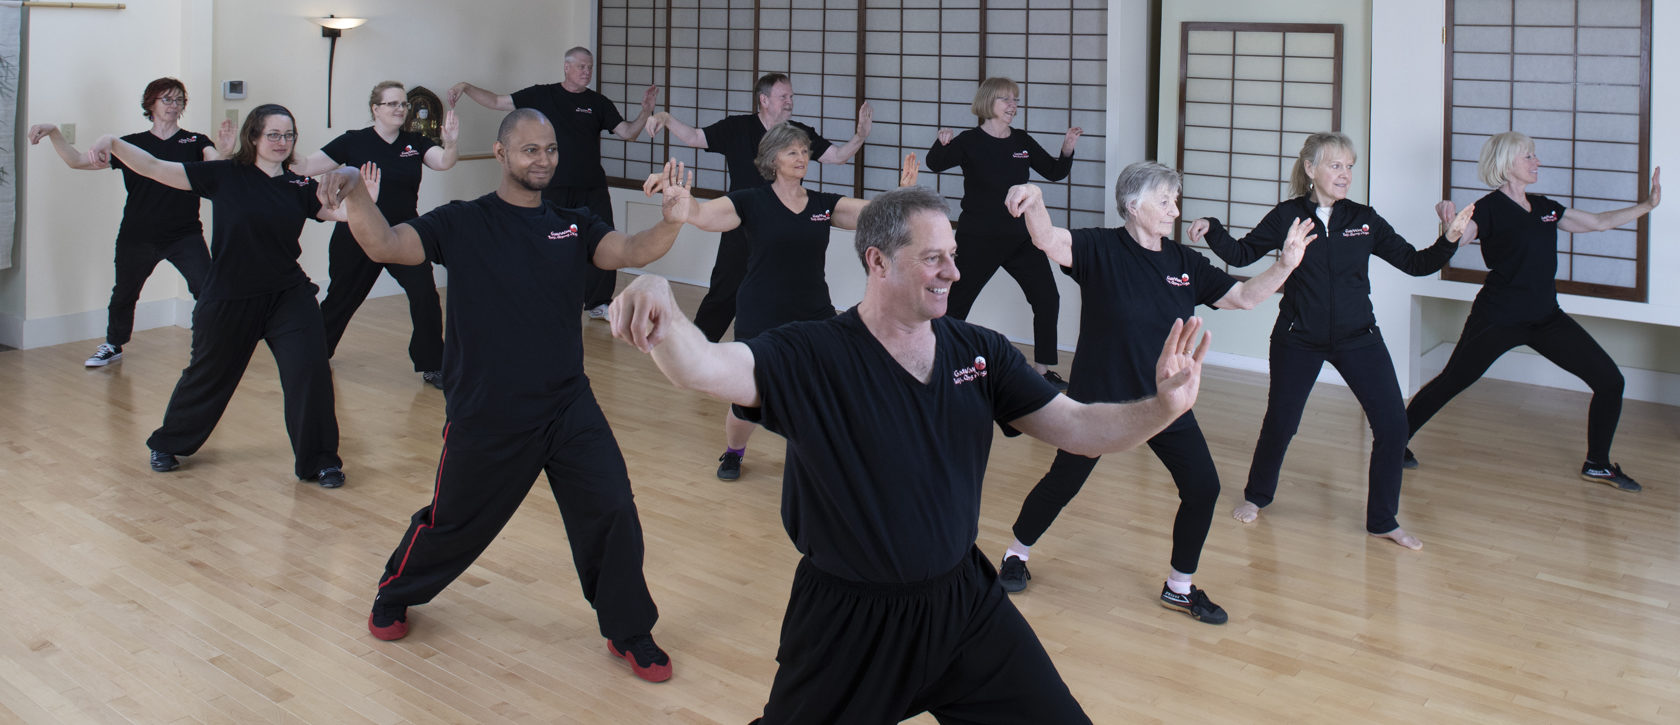 A Beginners Guide to the Tai Chi Short Form – Styles, Moves, and